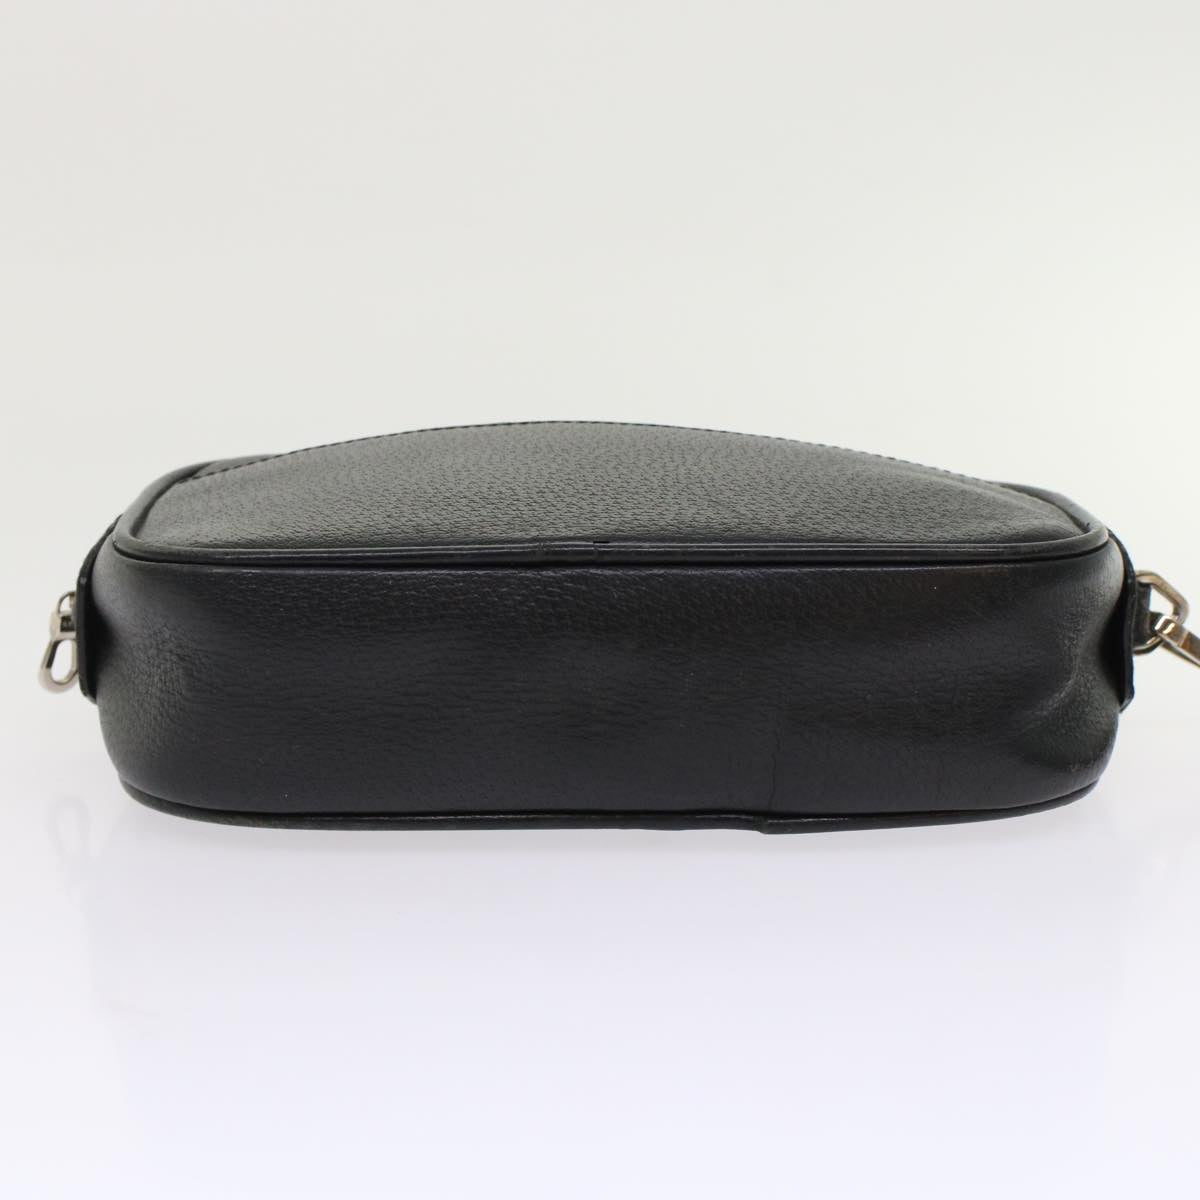 BALLY Clutch Bag Leather Black Auth bs7001